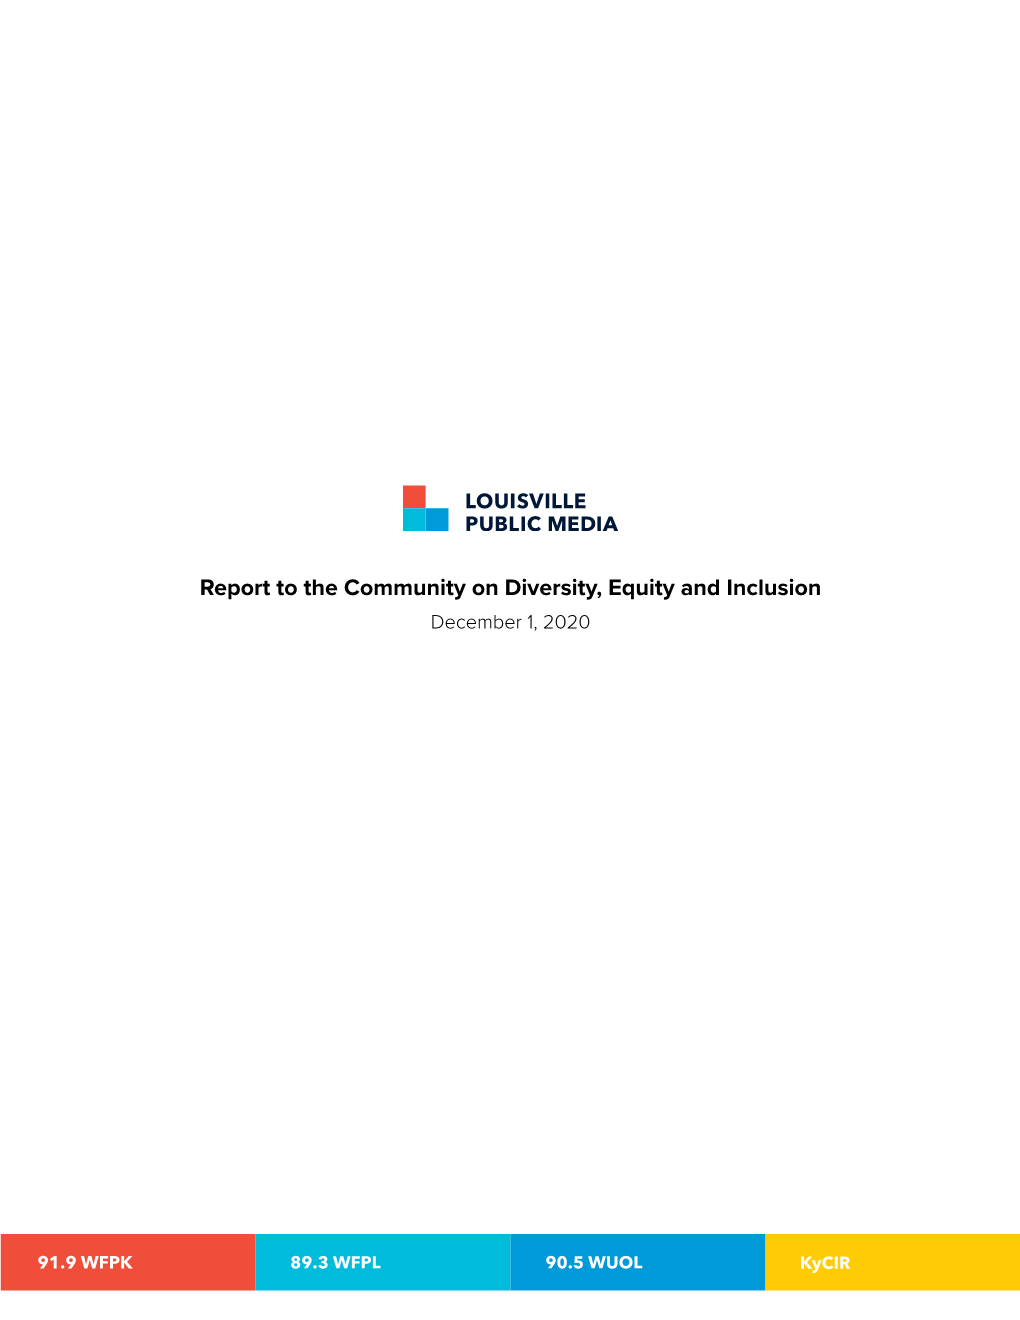 Report to the Community on Diversity, Equity and Inclusion December 1, 2020 Contents